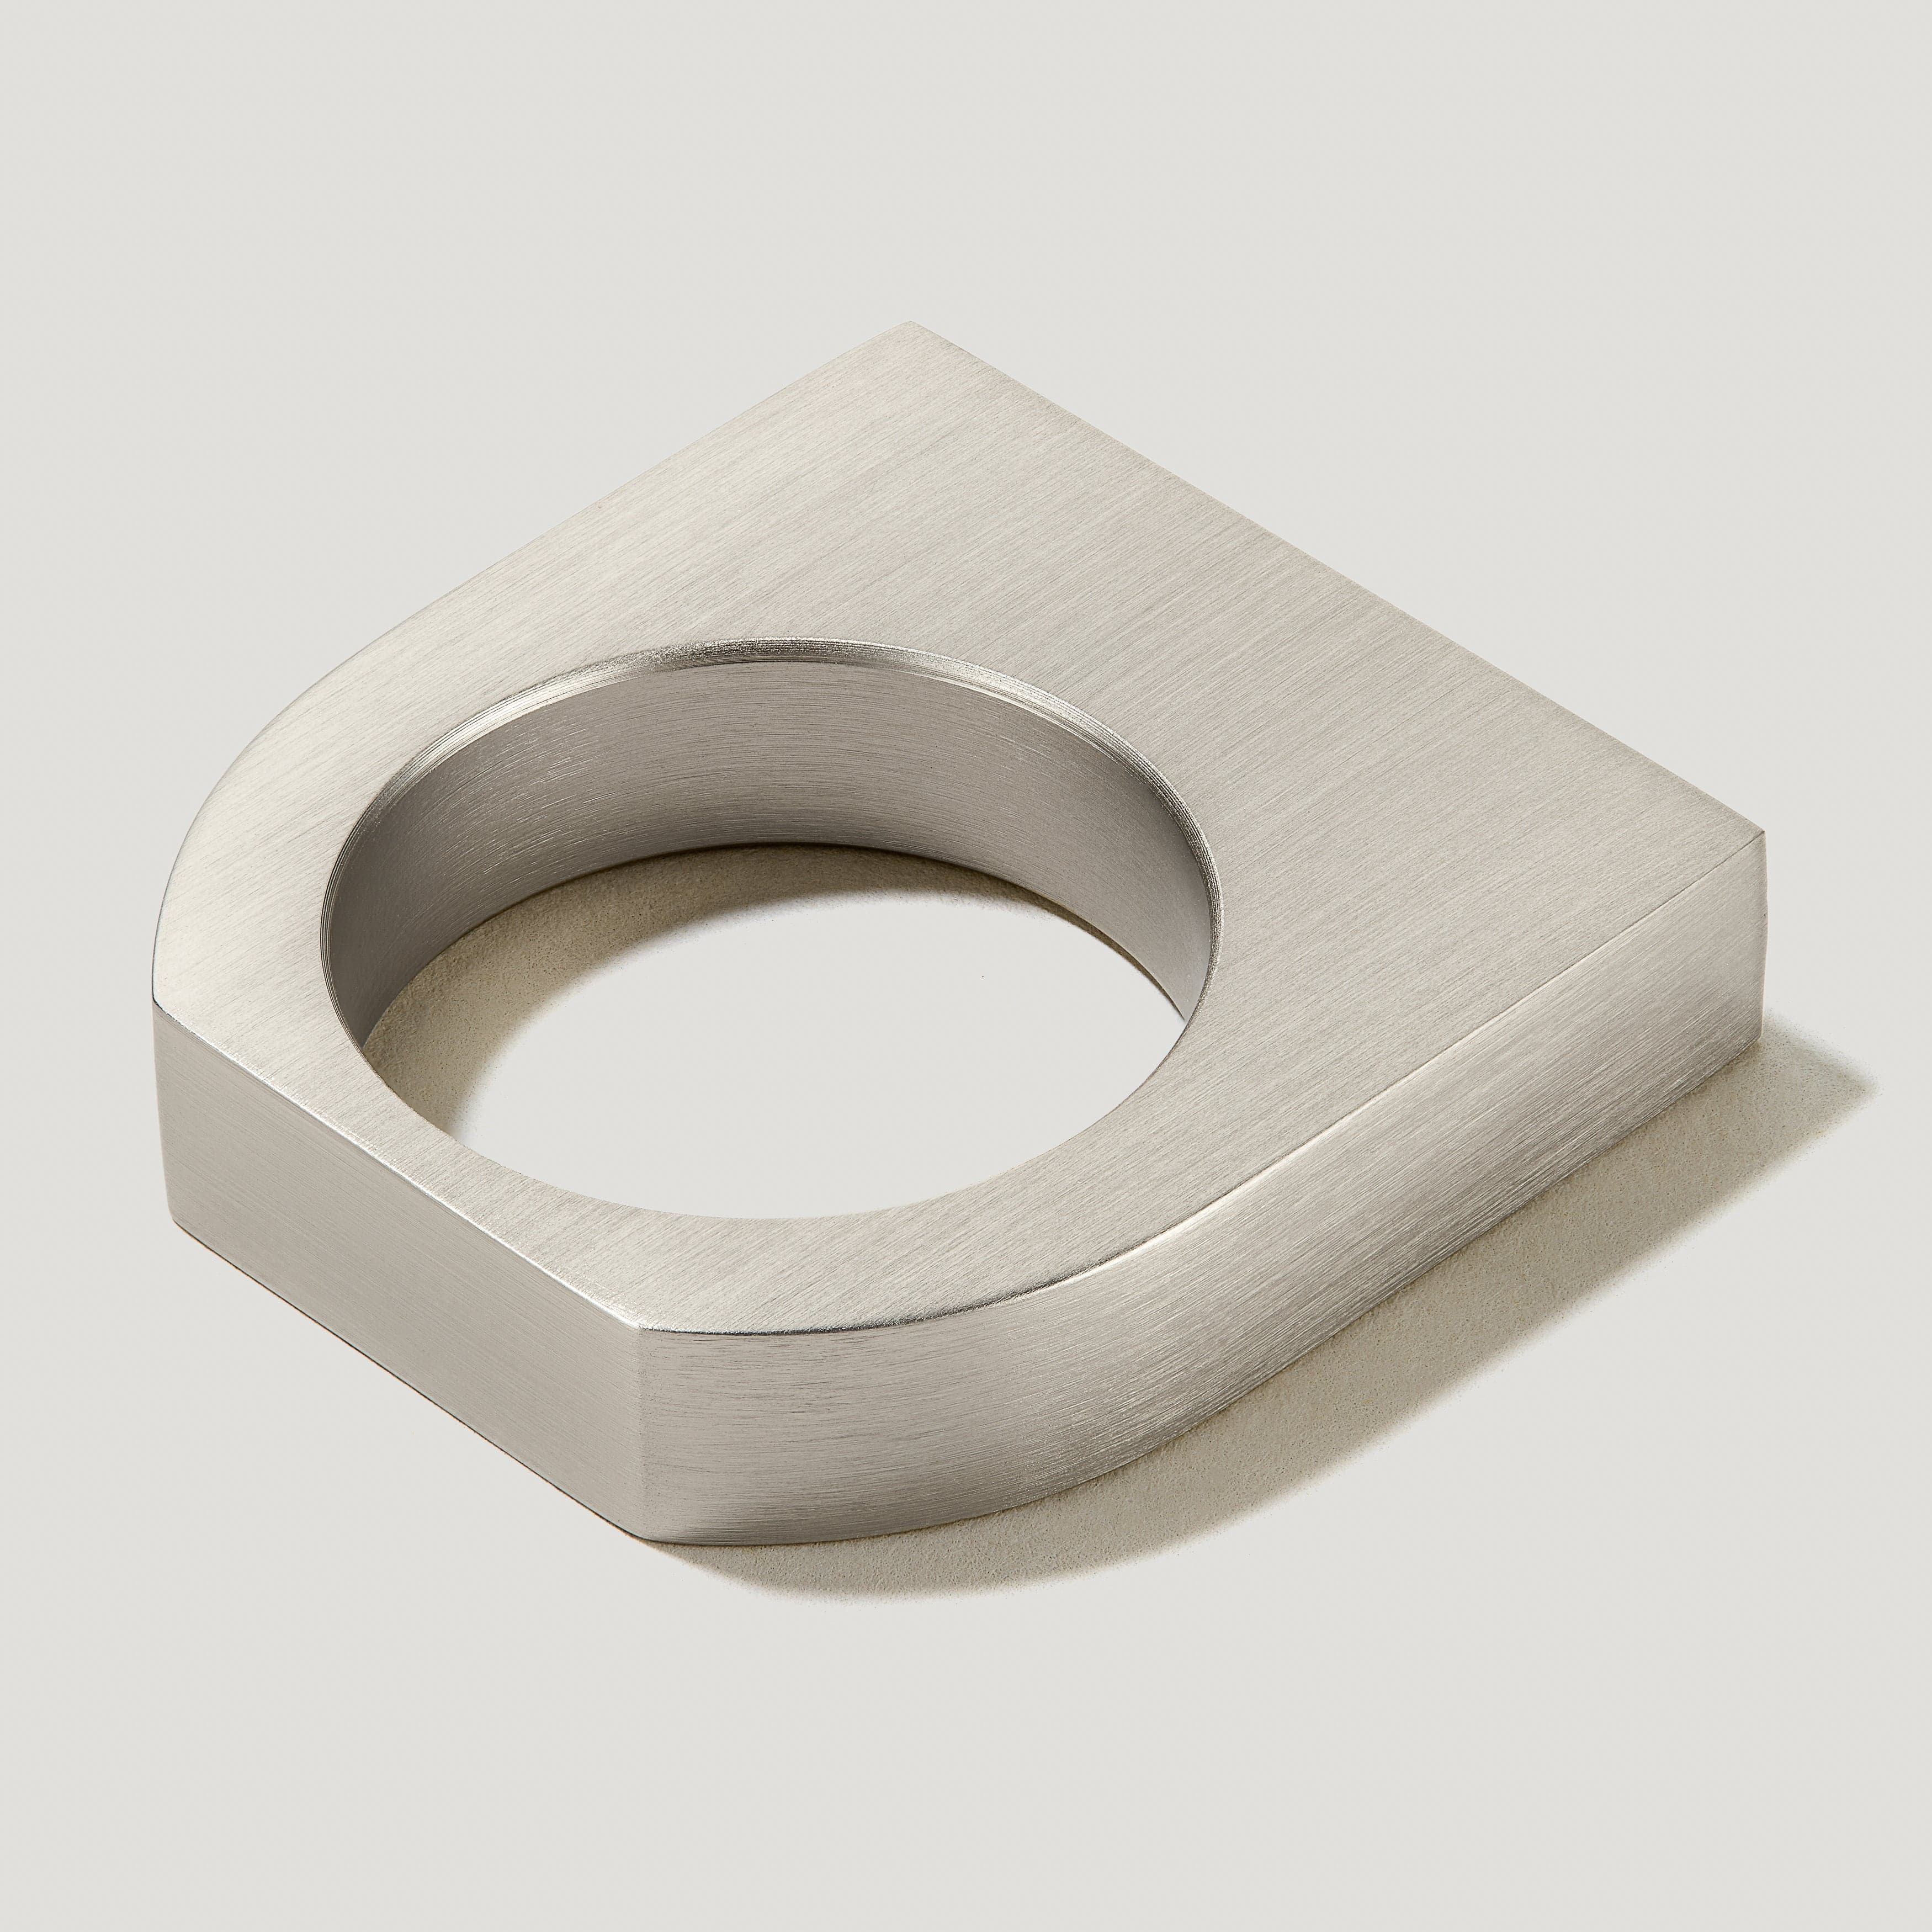 4mm x 40mm Stainless Steel D Ring